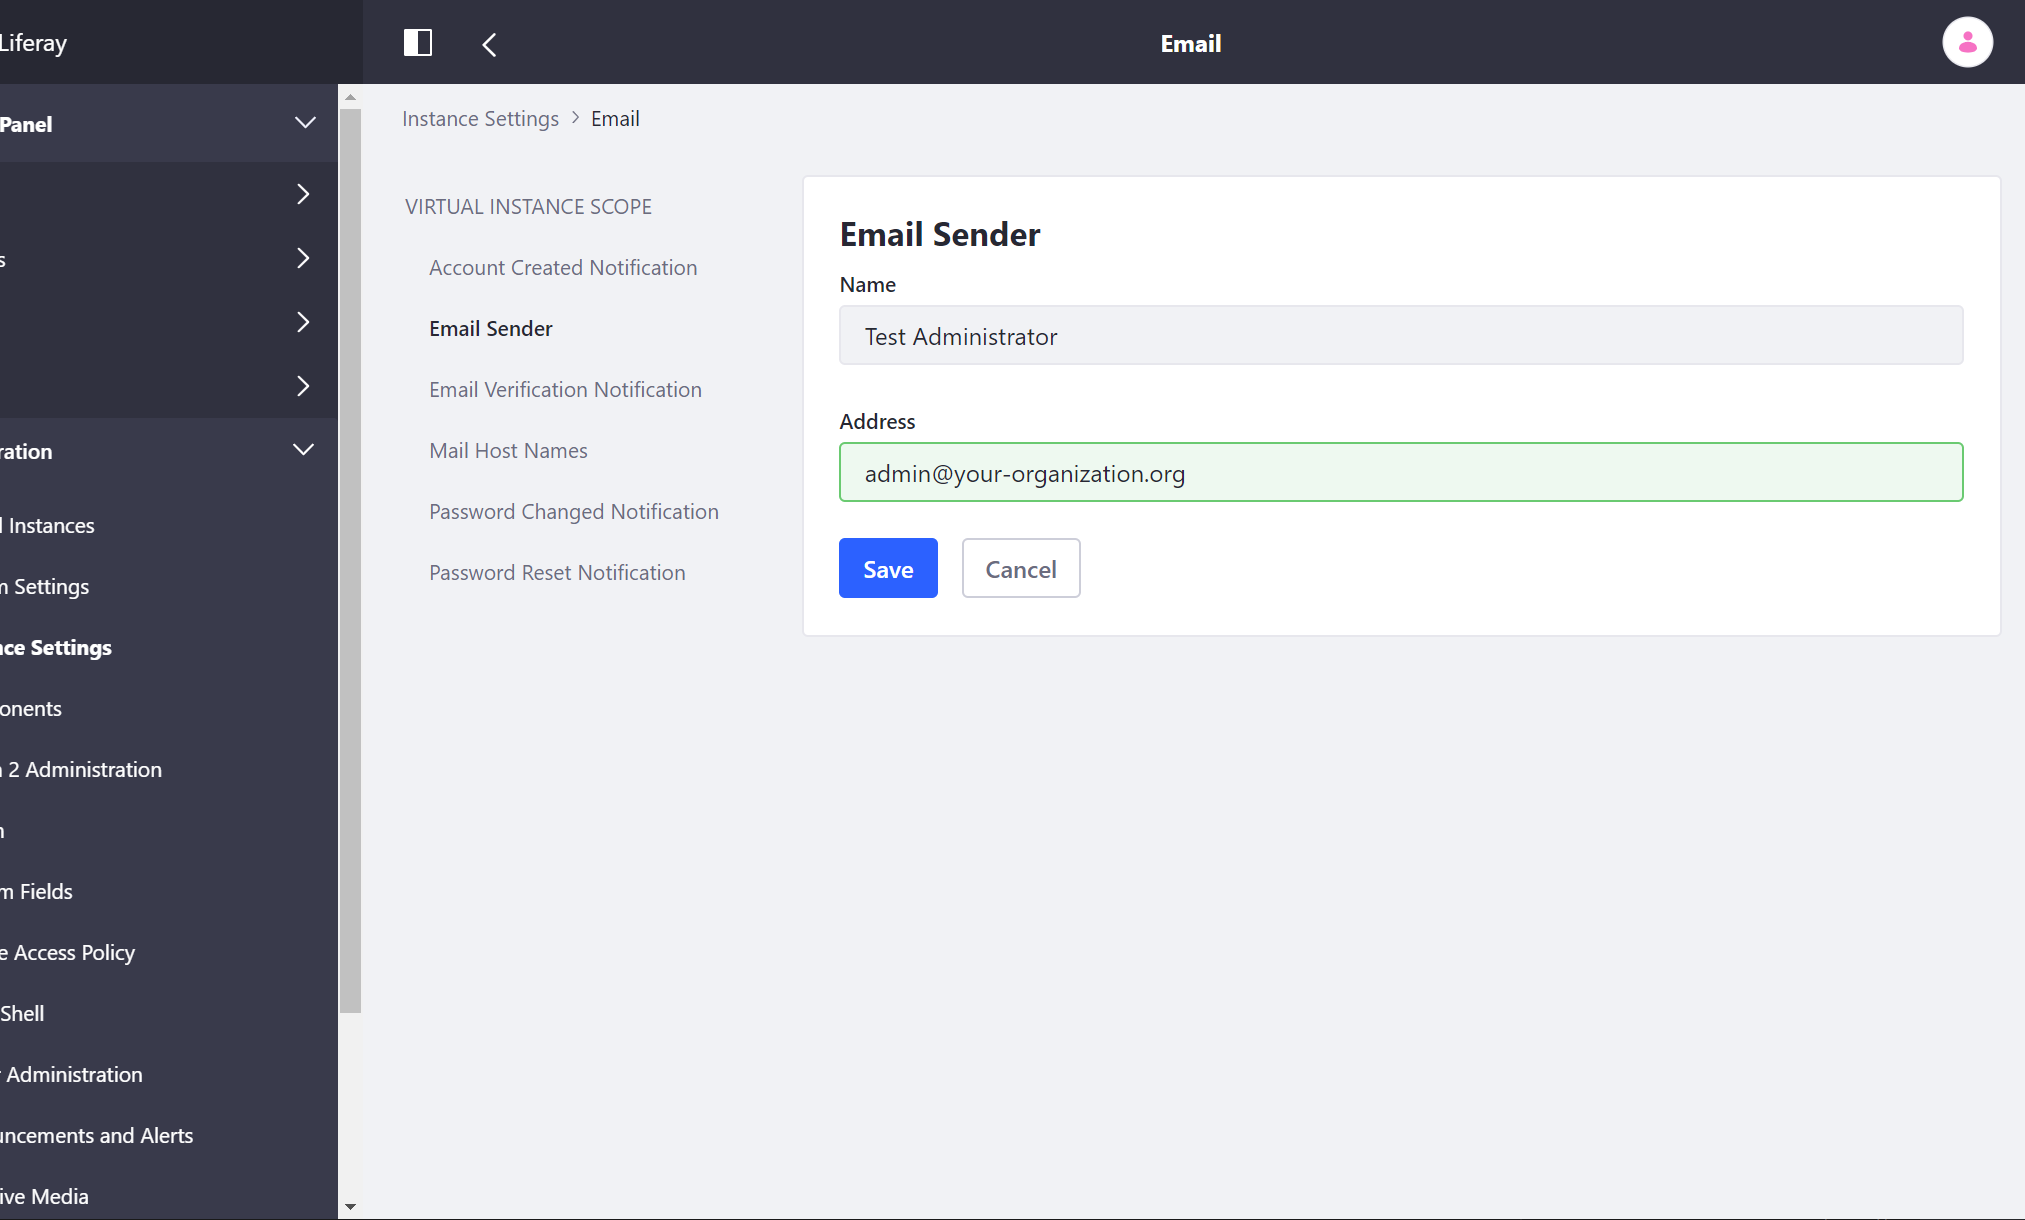 Changing the default email sender name and email address.